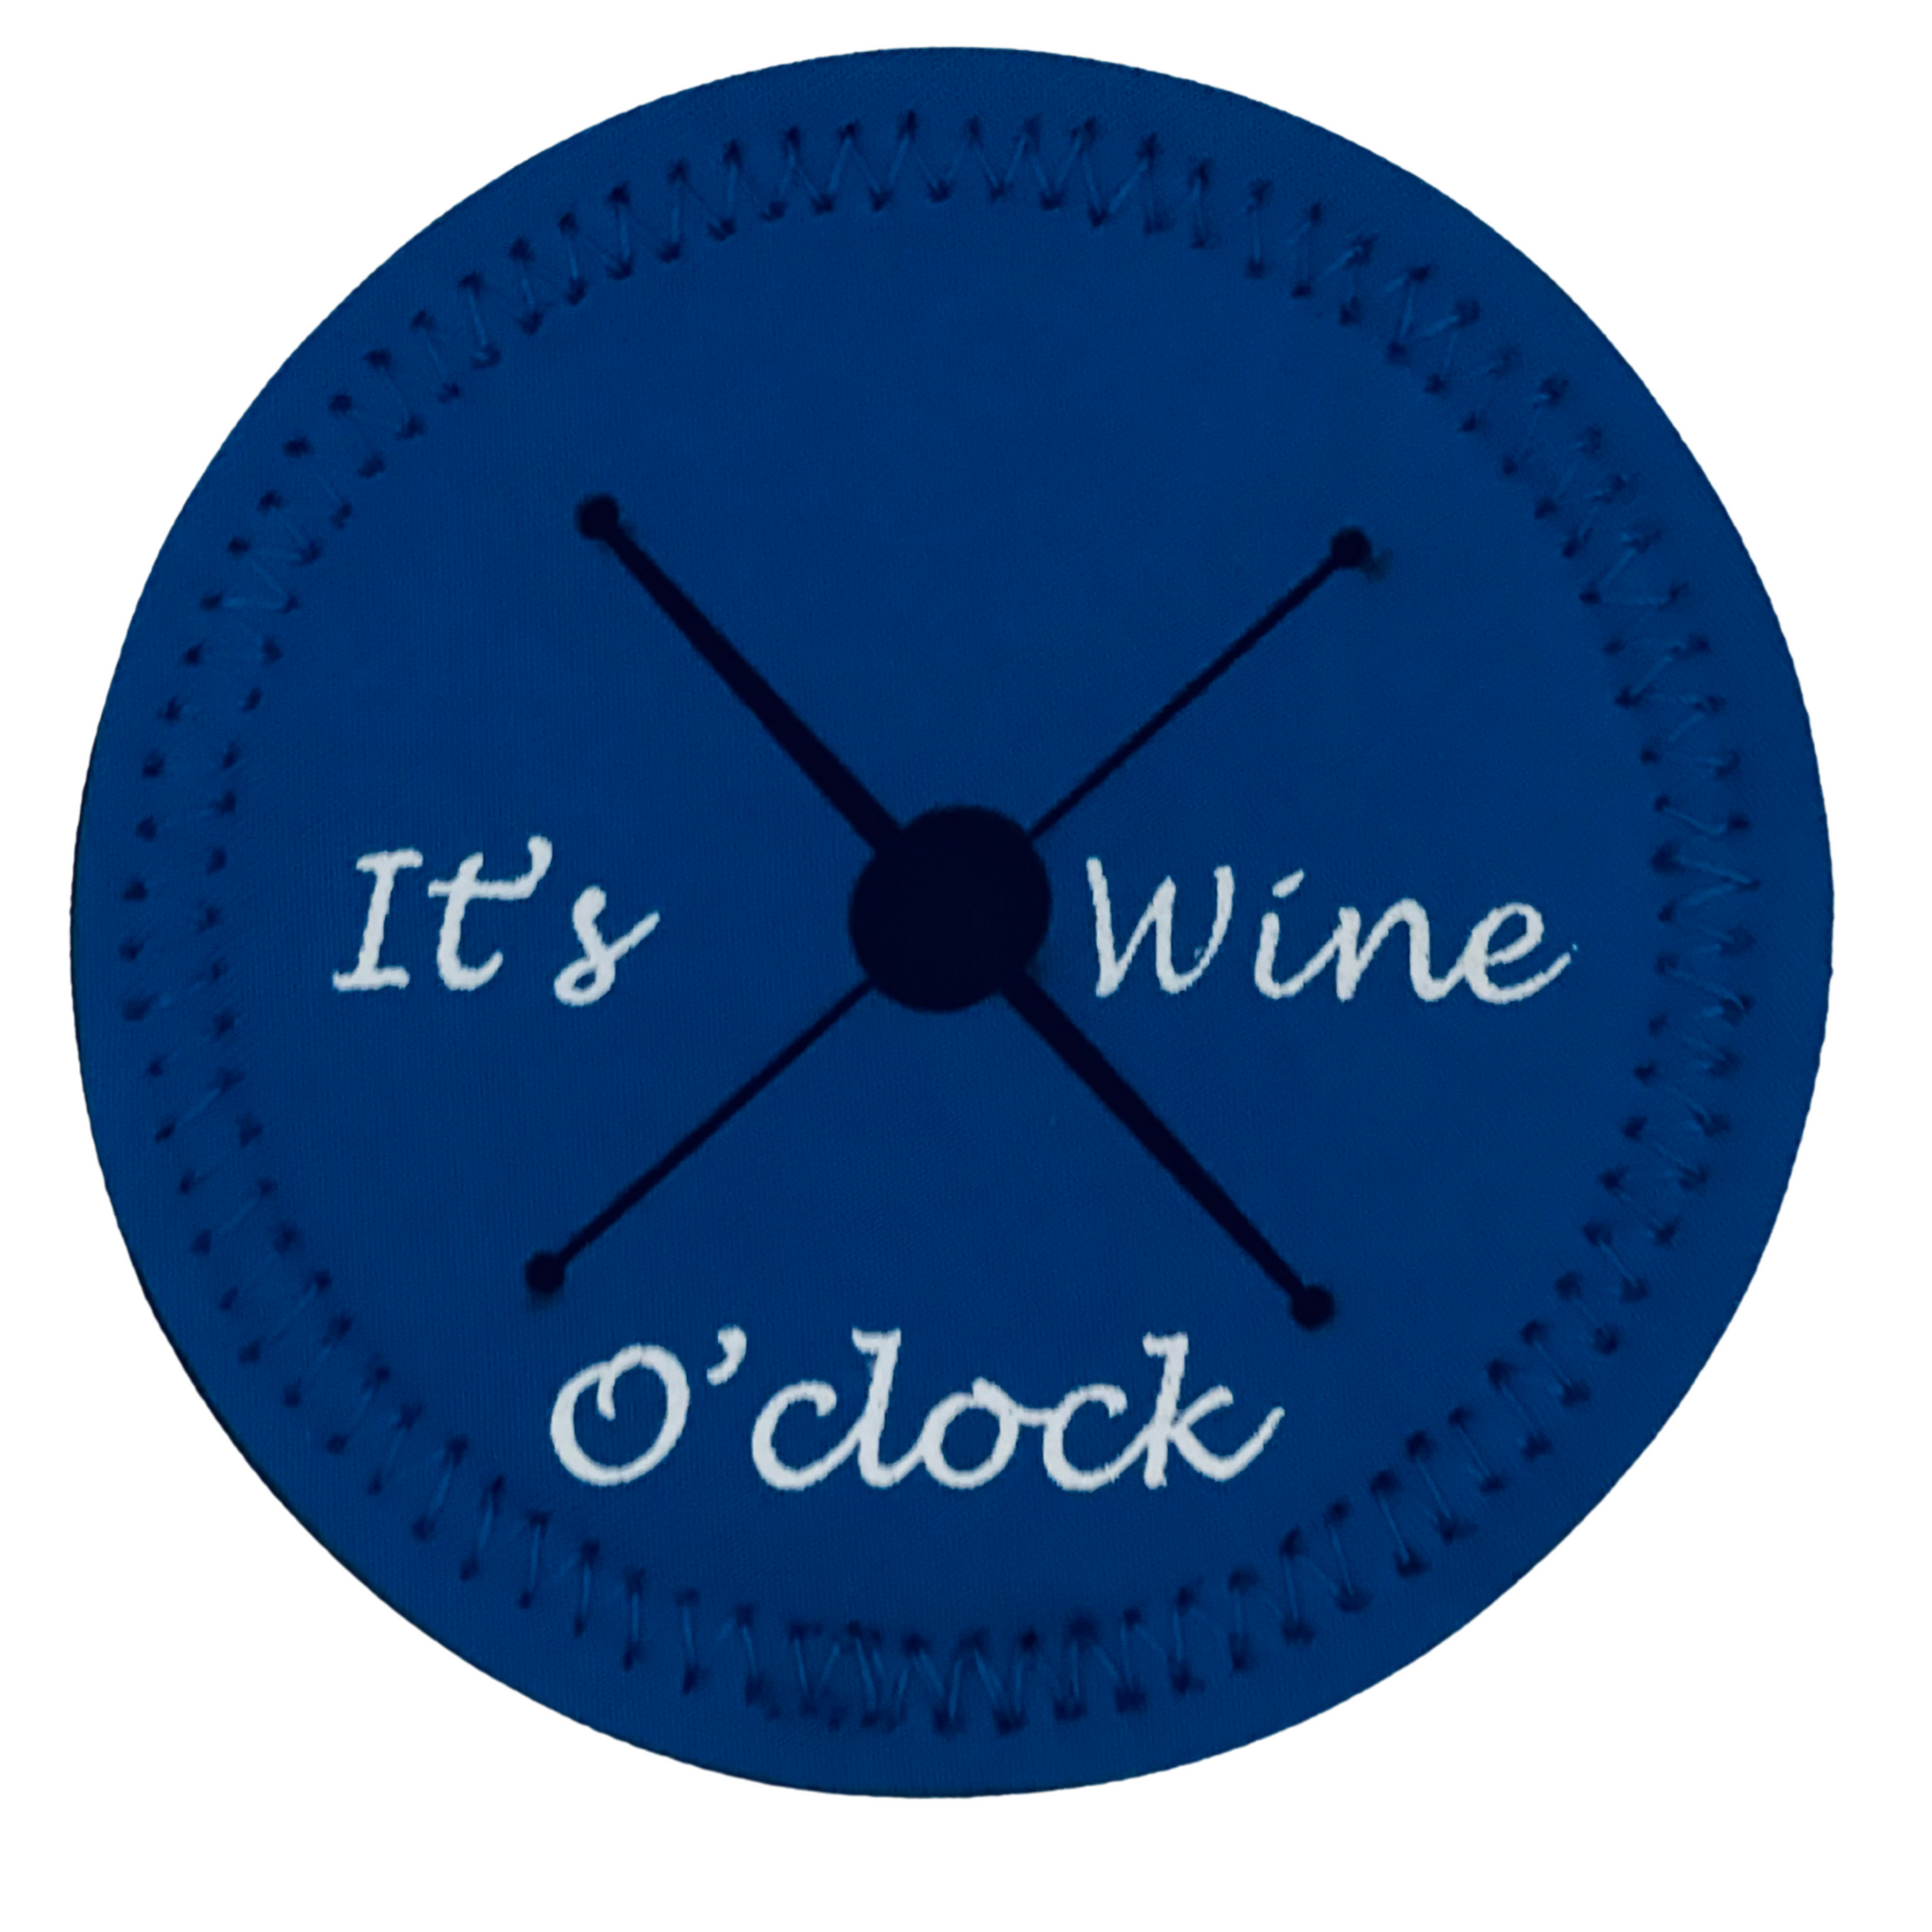 *It's Wine O'Clock- On a Royal Winedroplet